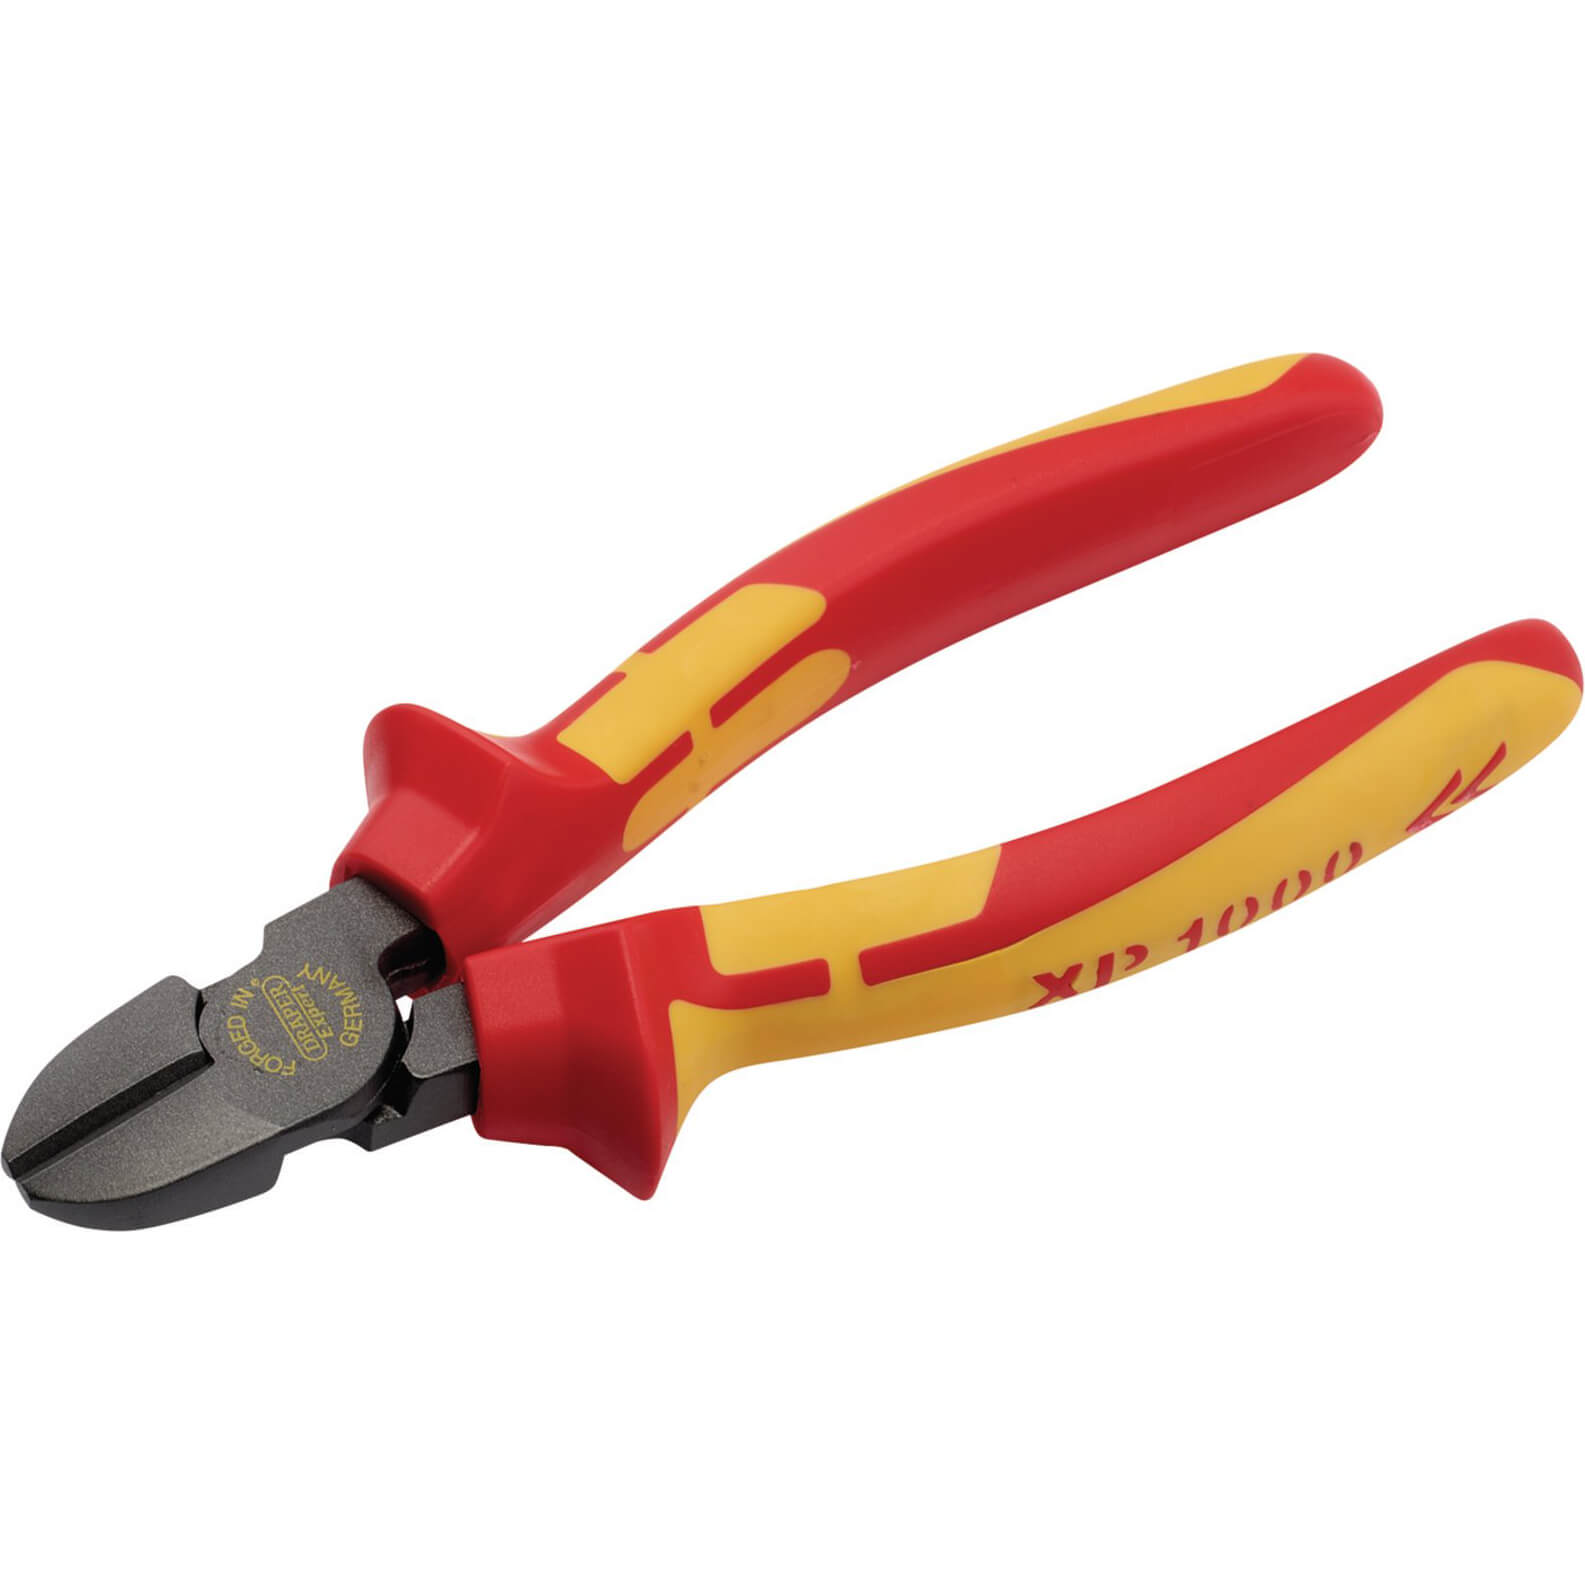 Draper XP1000 VDE Insulated High Leverage Side Cutters 160mm